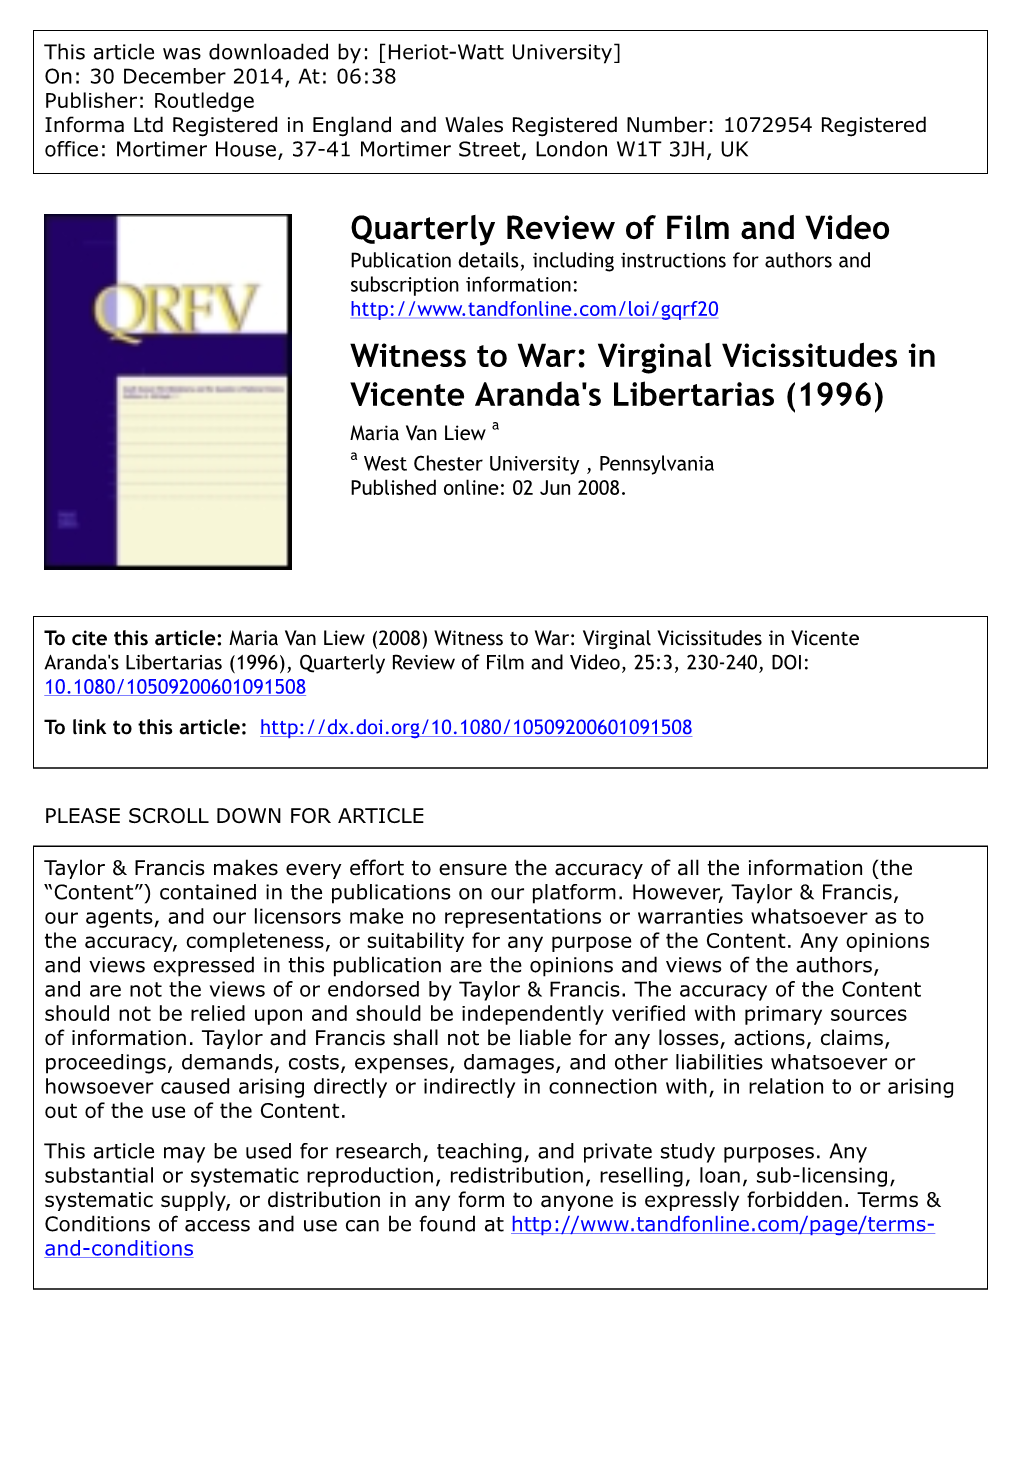 Quarterly Review of Film and Video Witness to War